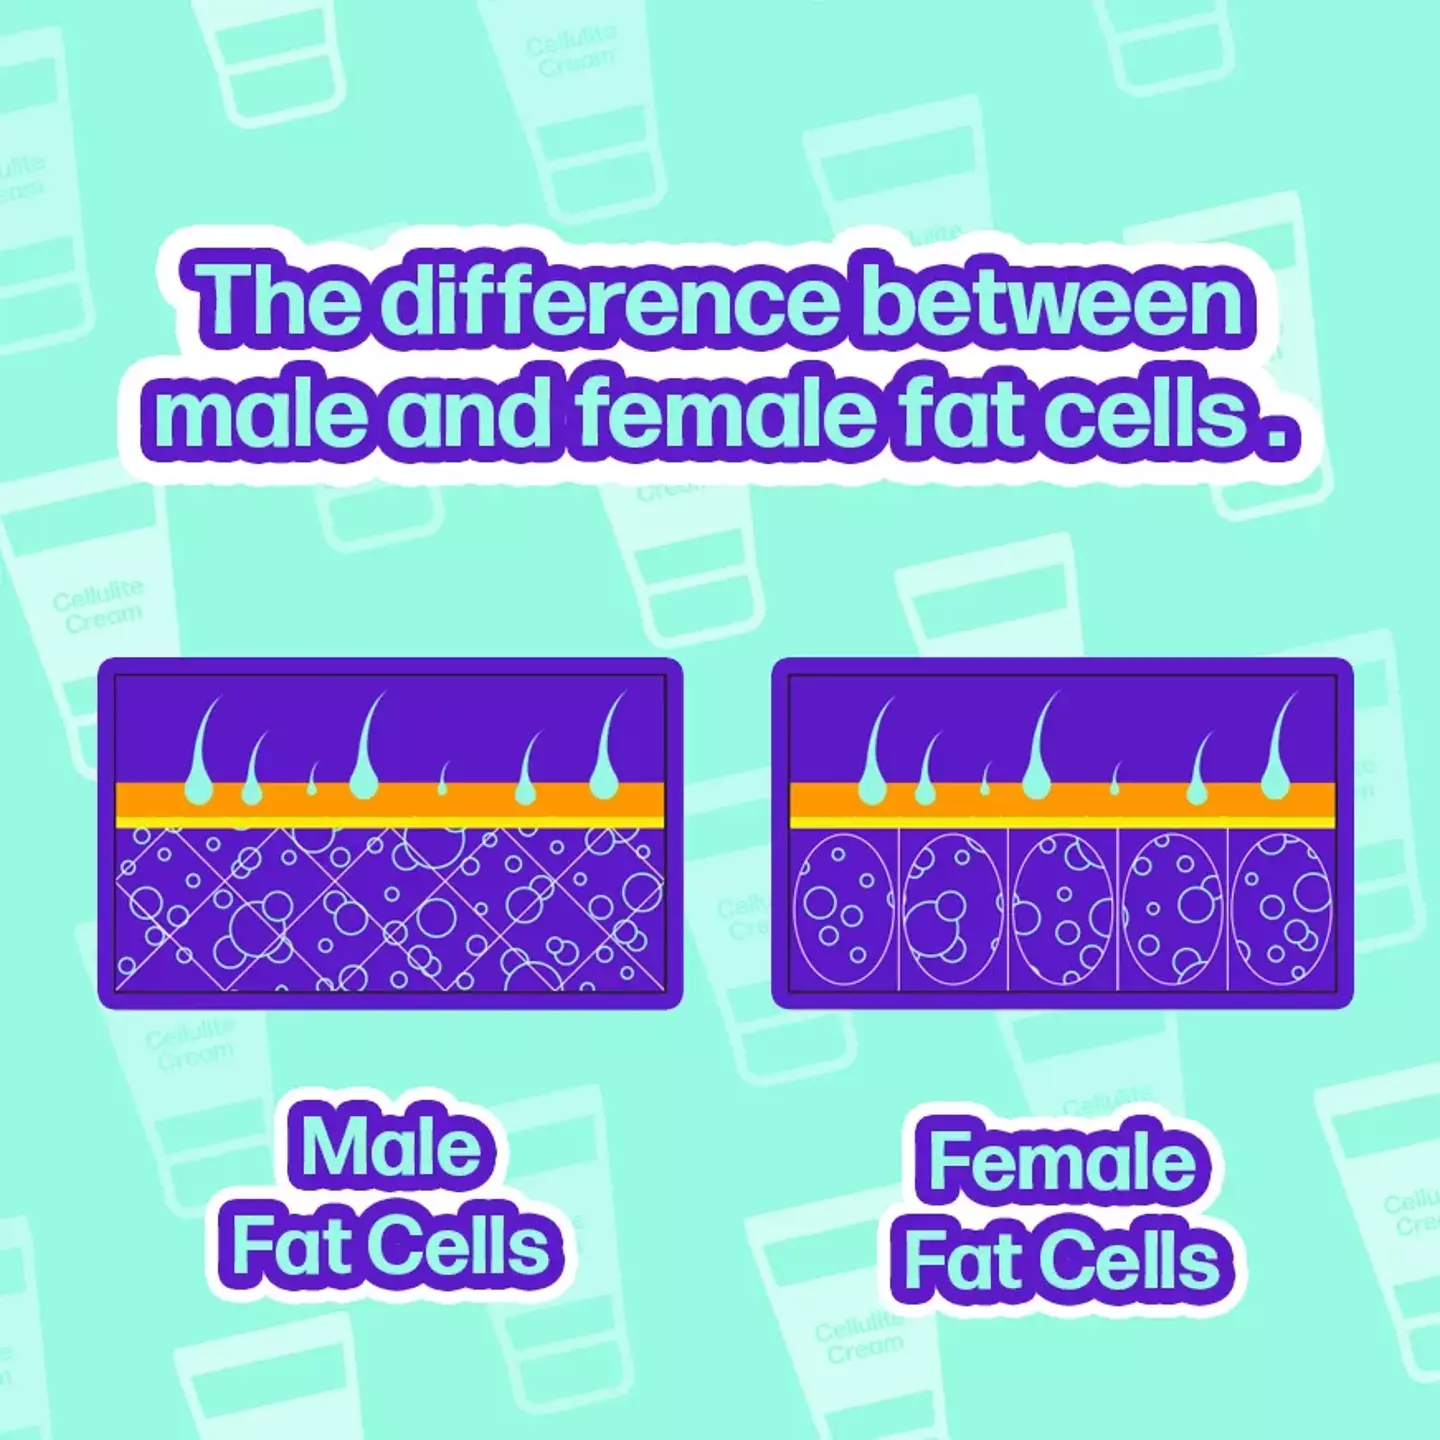 Male and female fat cells are also structured differently - women's contain a more circular structure.